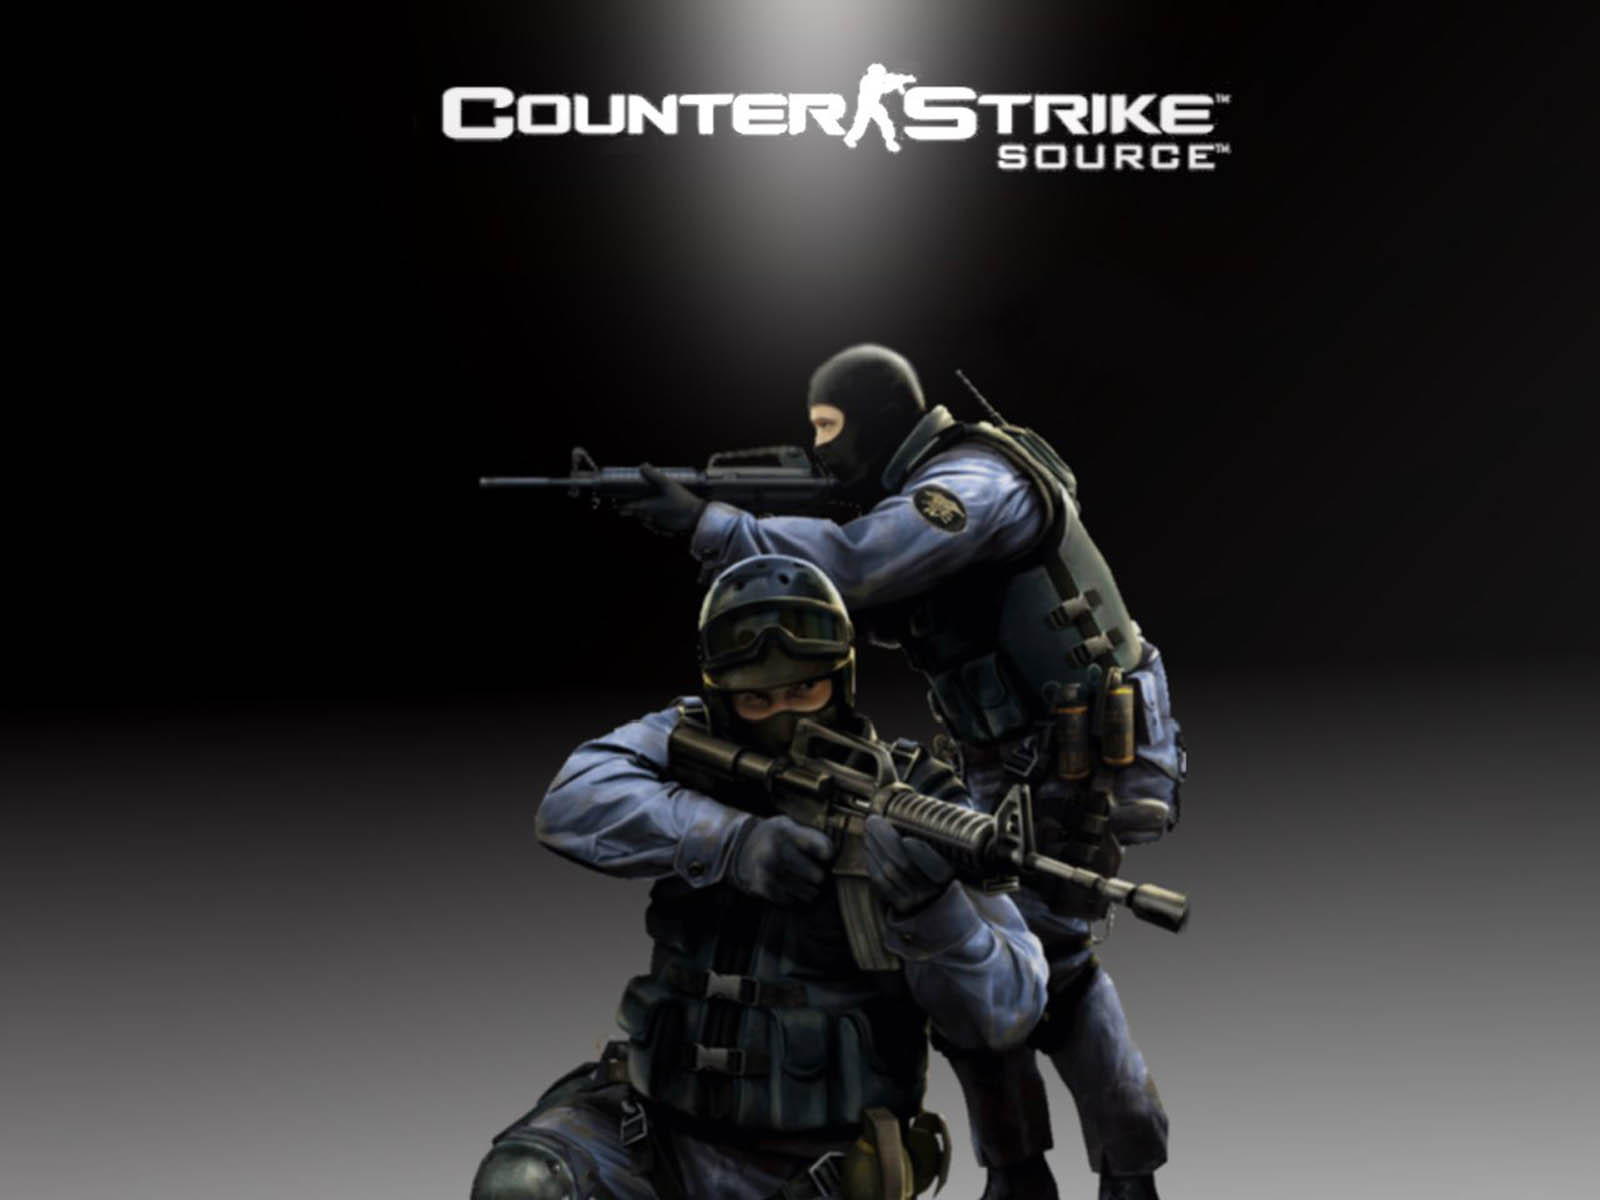 Tag Counter Strike Source Game Wallpaper Background Photos Image